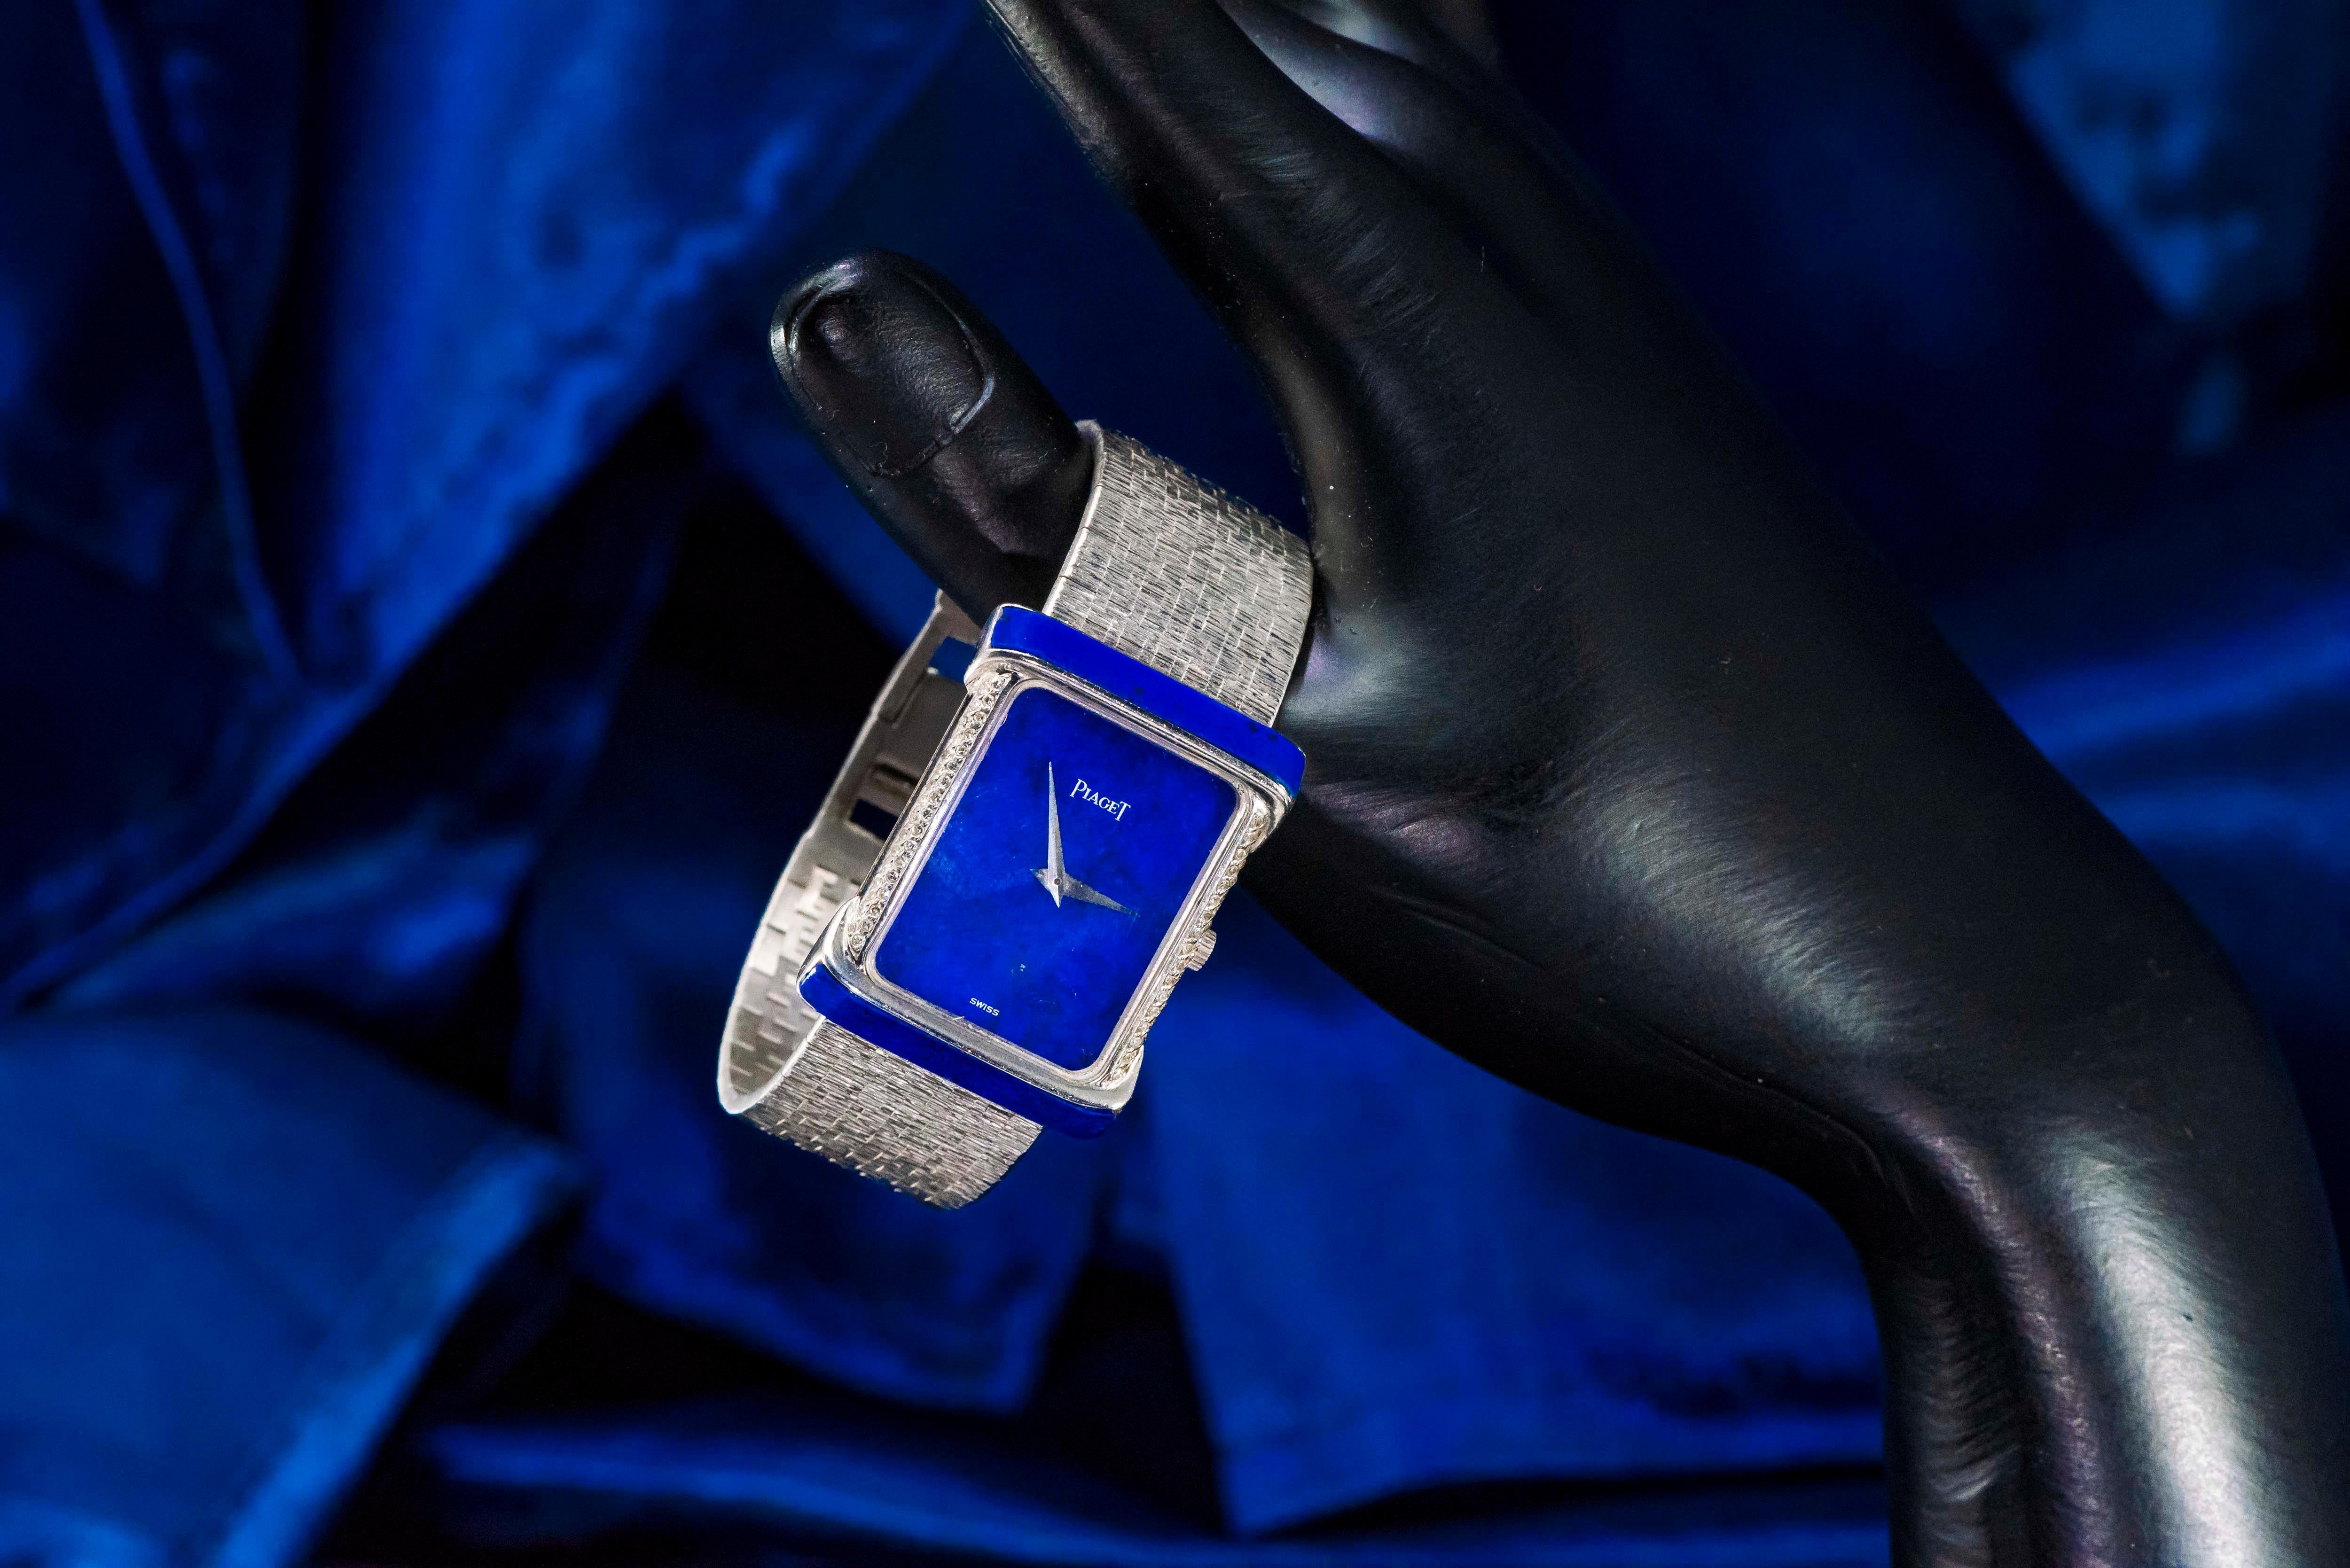 Dimensions 
34mm Long X 28mm Wide
Wrist size fits up to 170mm
*Can be resized as necessary

The present large Piaget example is an extremely unique case design for the brand which is designed with cut Vibrant Blue Lapis on both the top and bottom